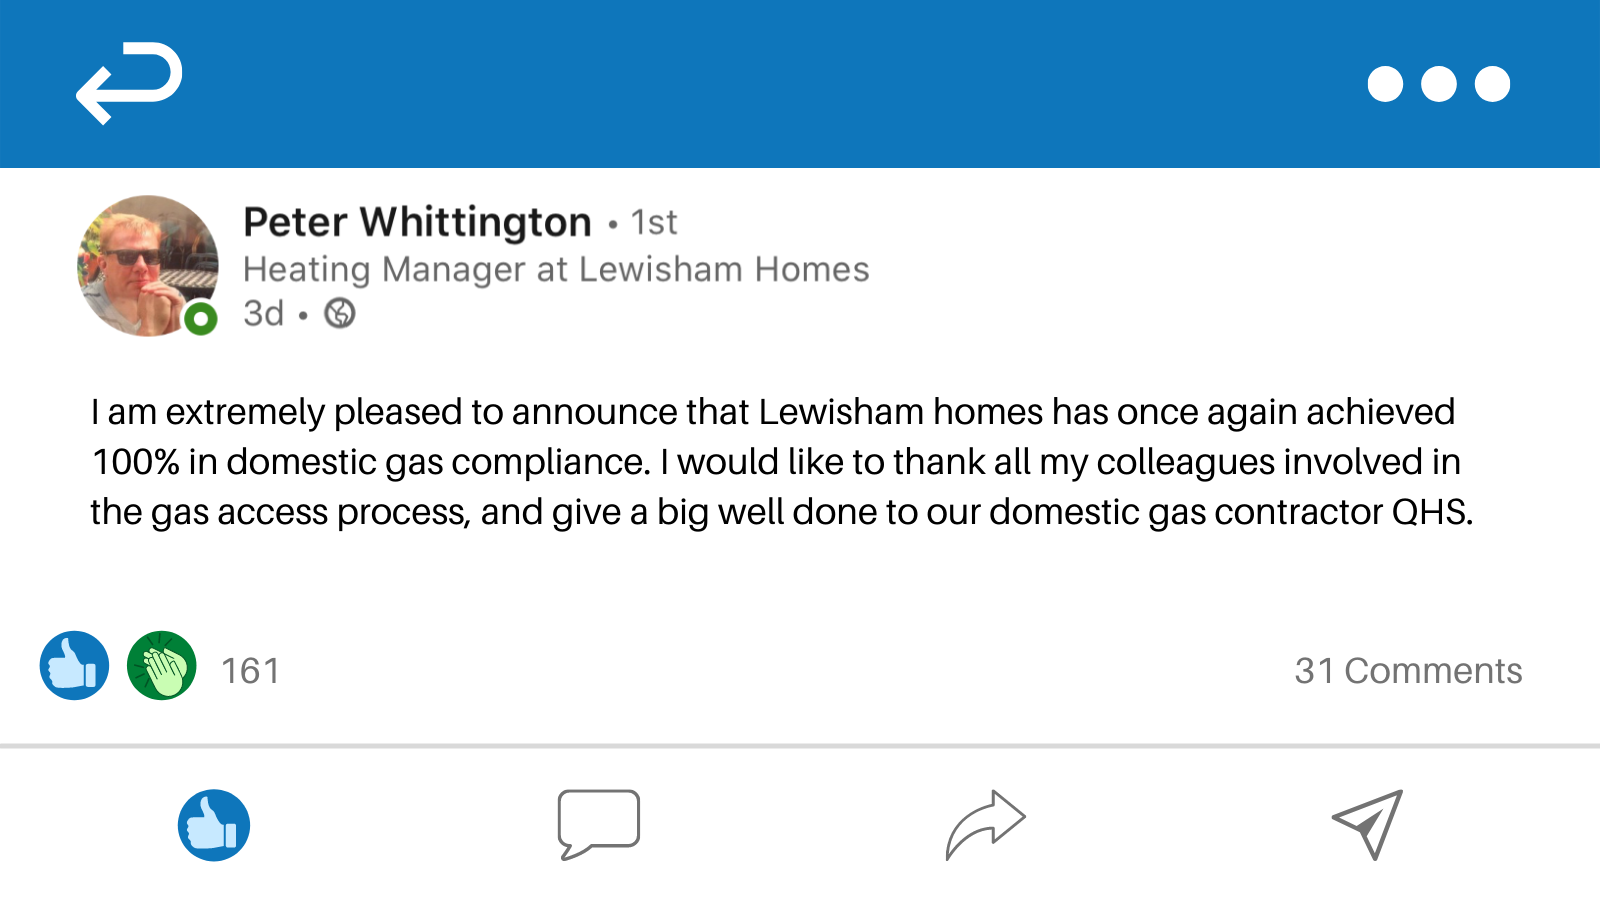 100% compliance achieved for Lewisham Homes